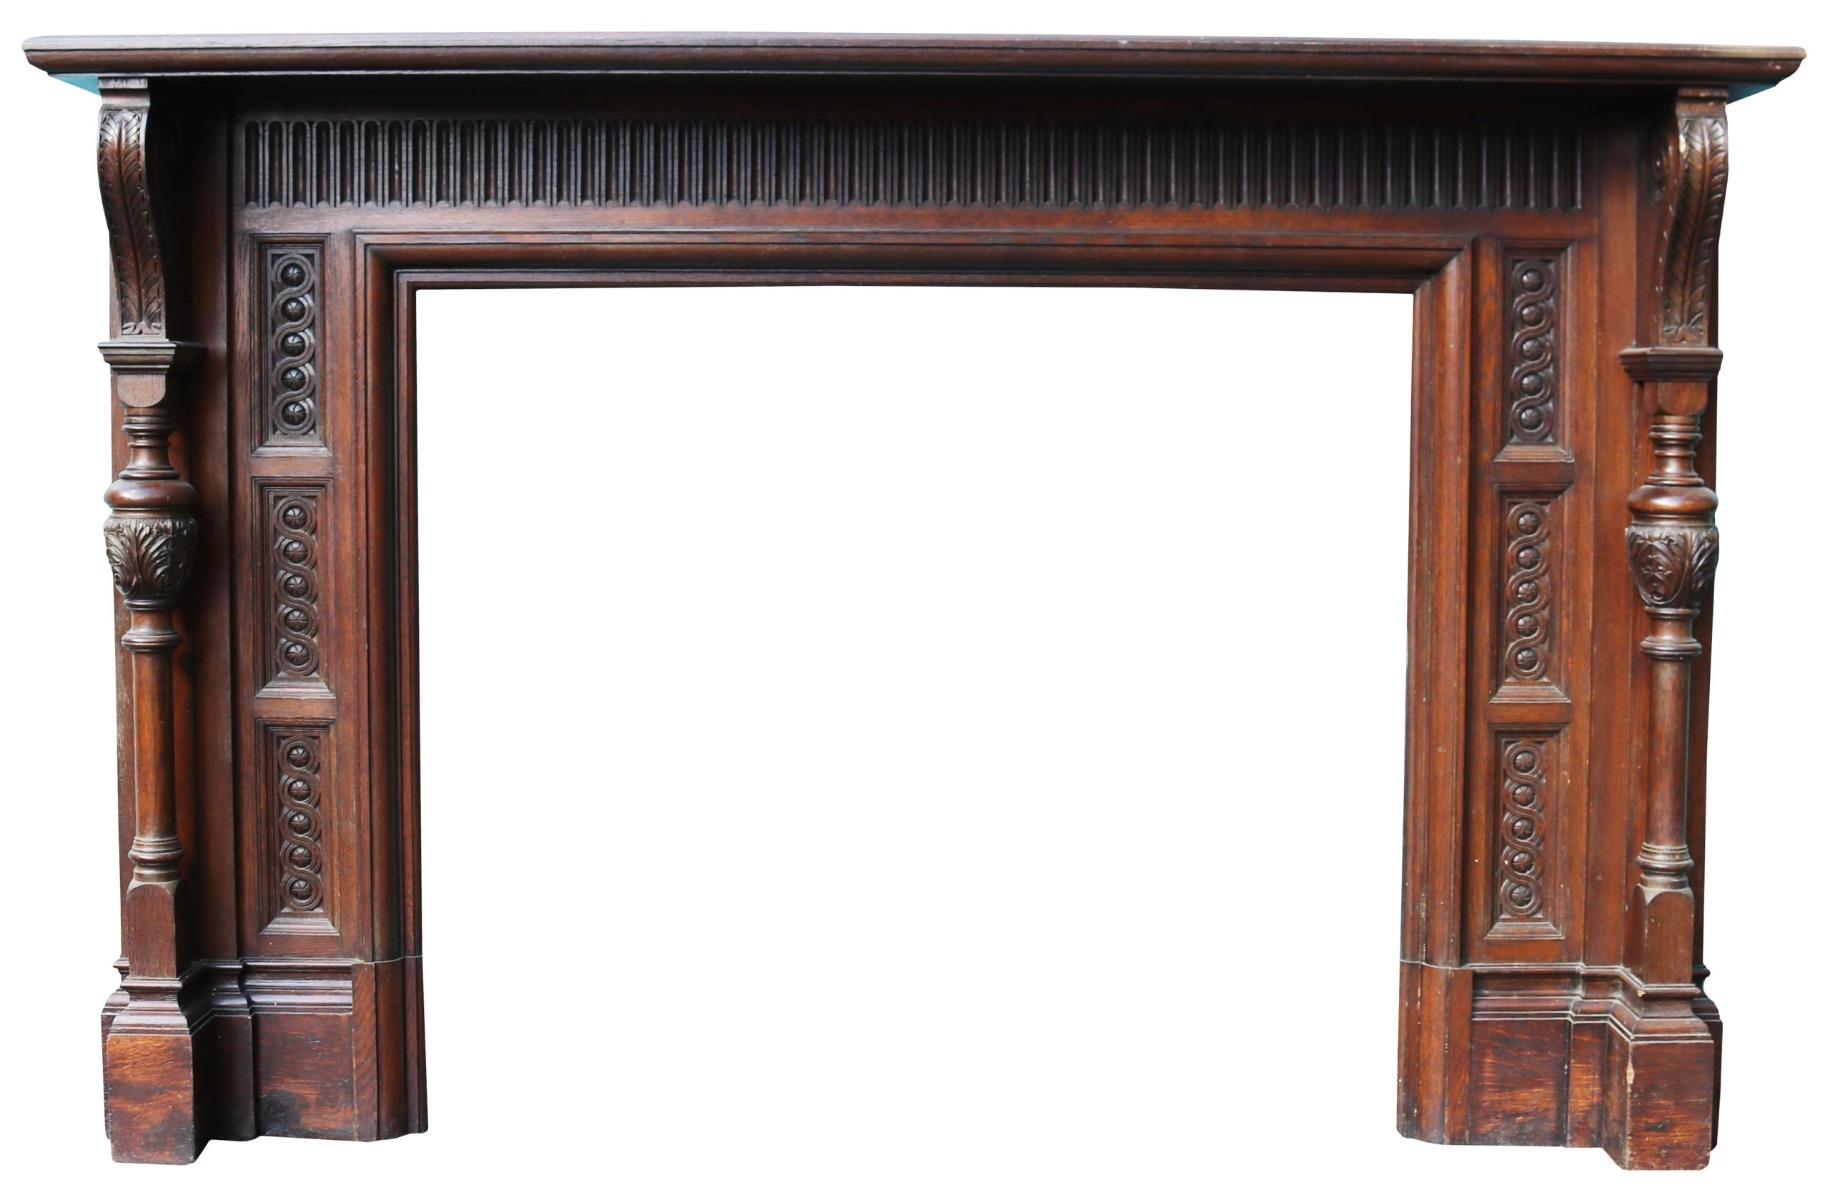 This English Jacobean style fireplace was reclaimed from a house near Salisbury.

Additional dimensions:

Opening height  101 cm

Opening width 117 cm

Width between outside of foot blocks 193.5 cm.